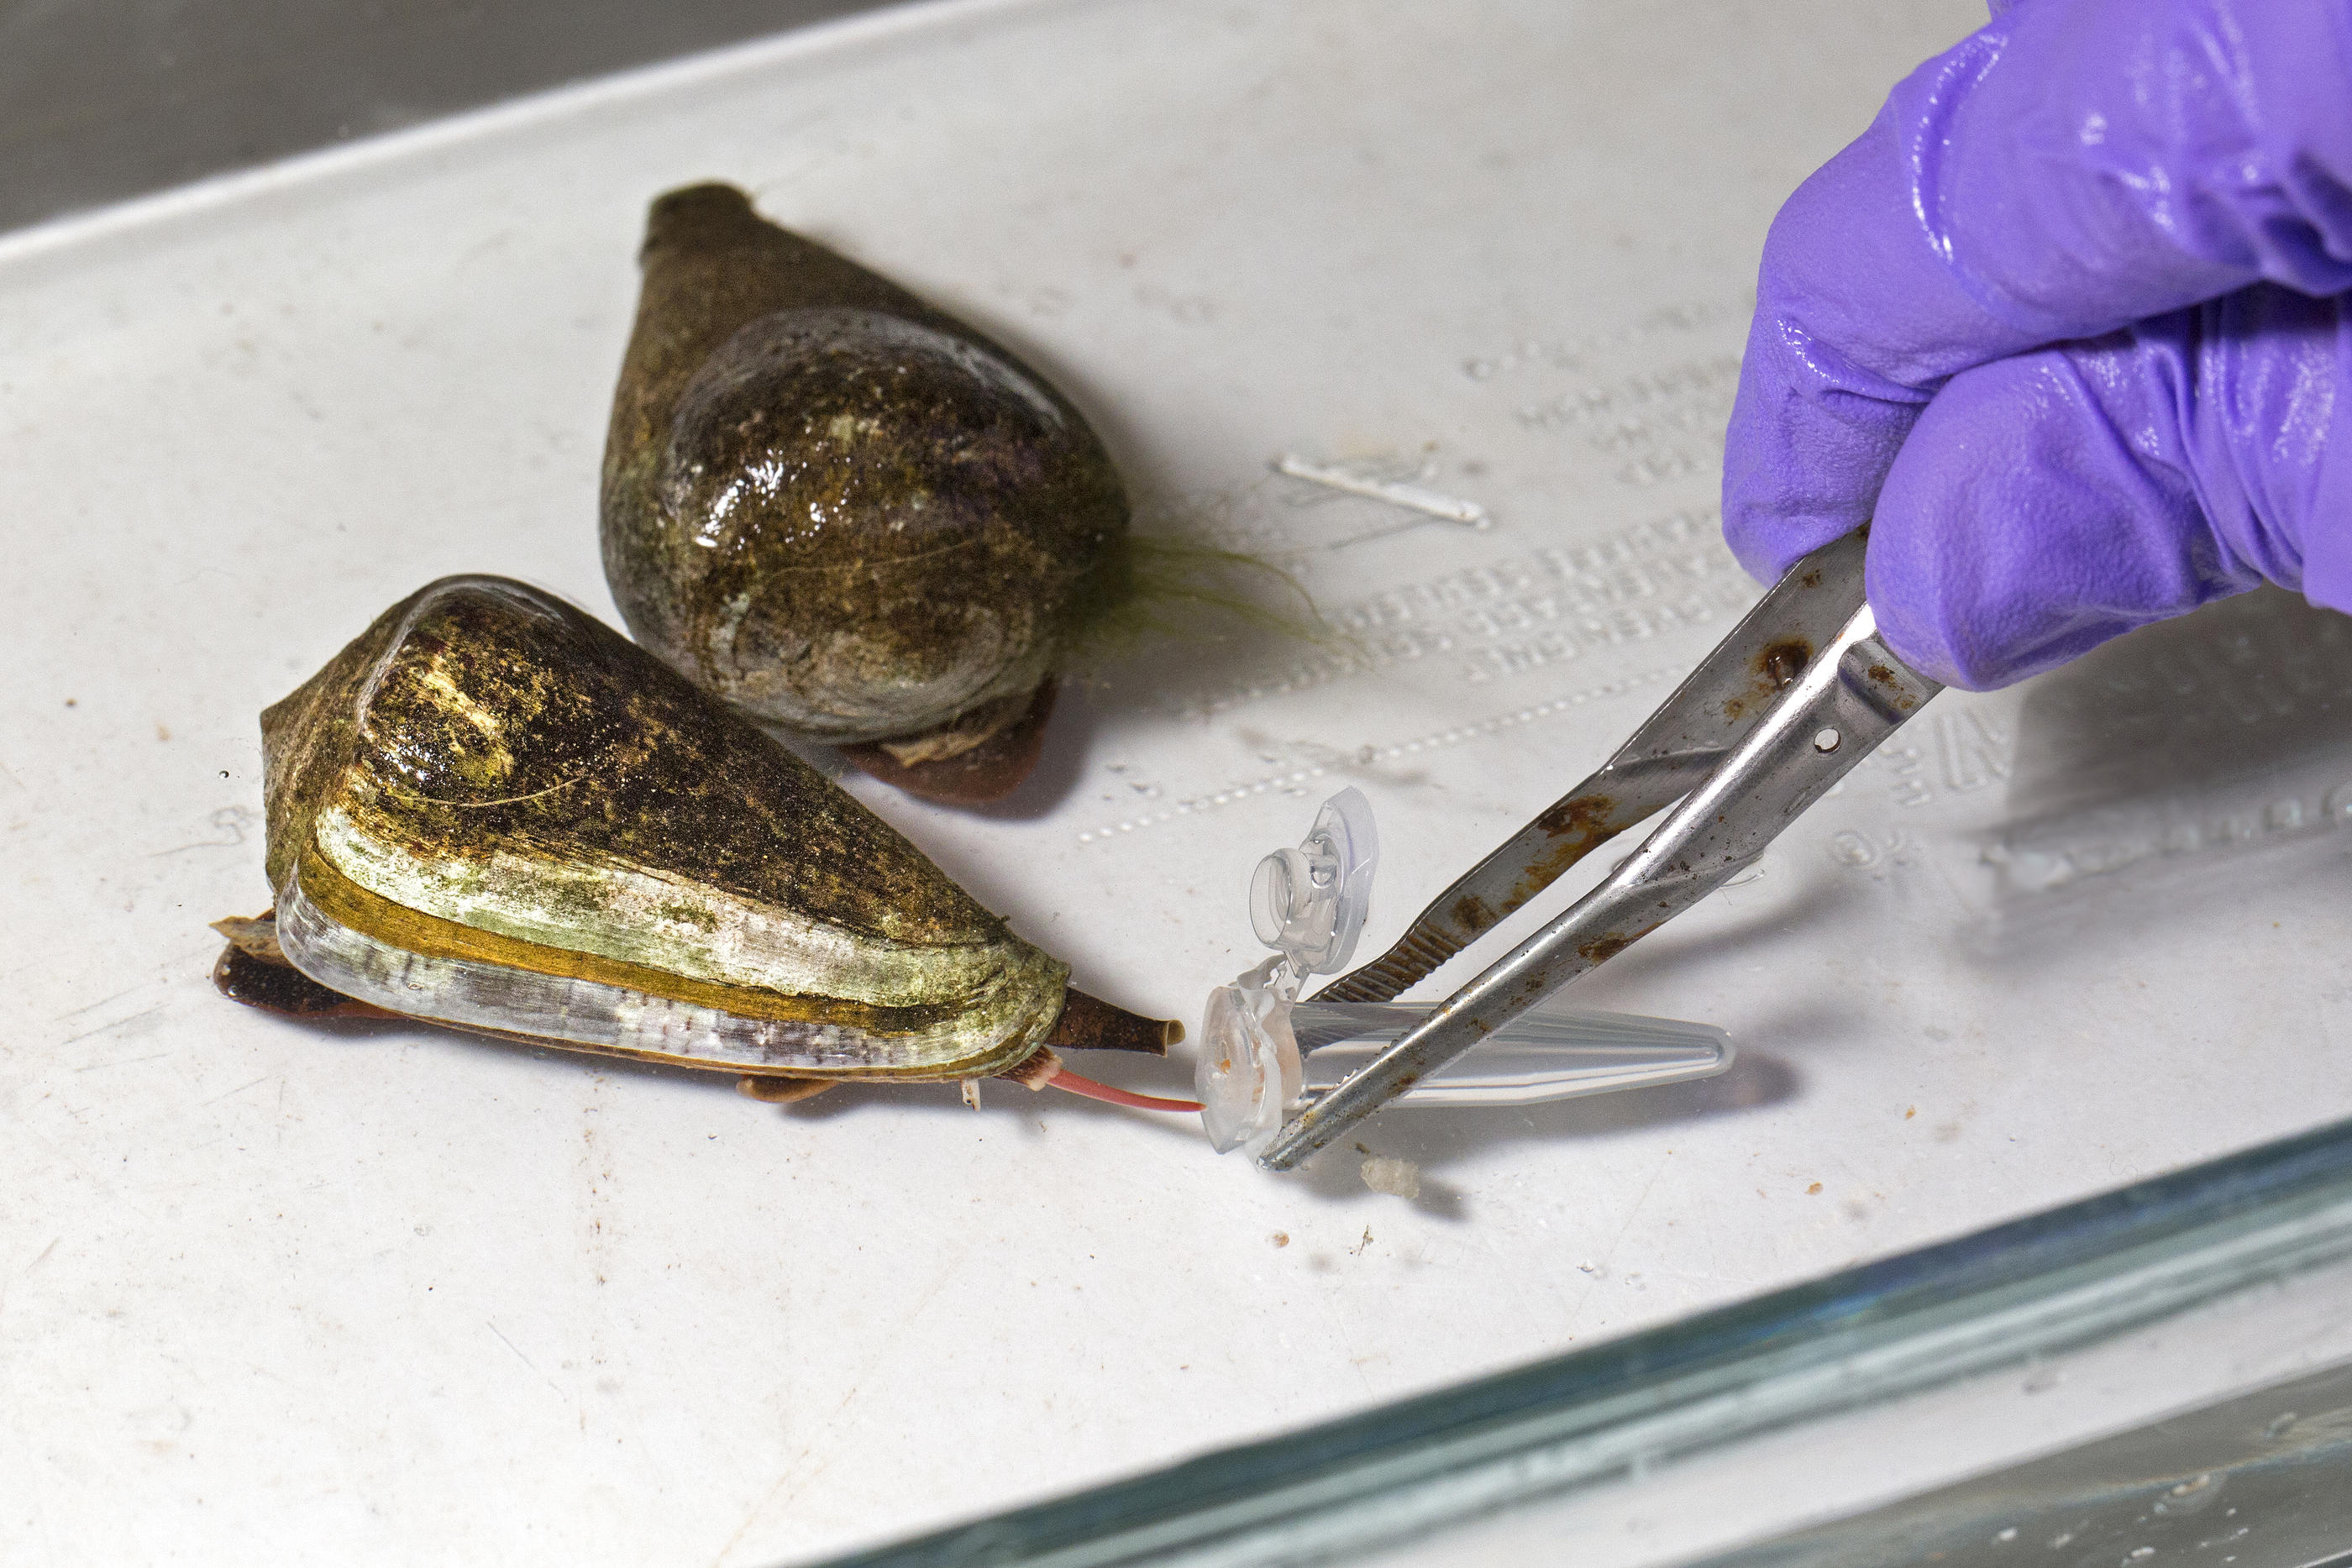 How the Cone Snail's Deadly Venom Can Help Us Build Better Medicines | NIST